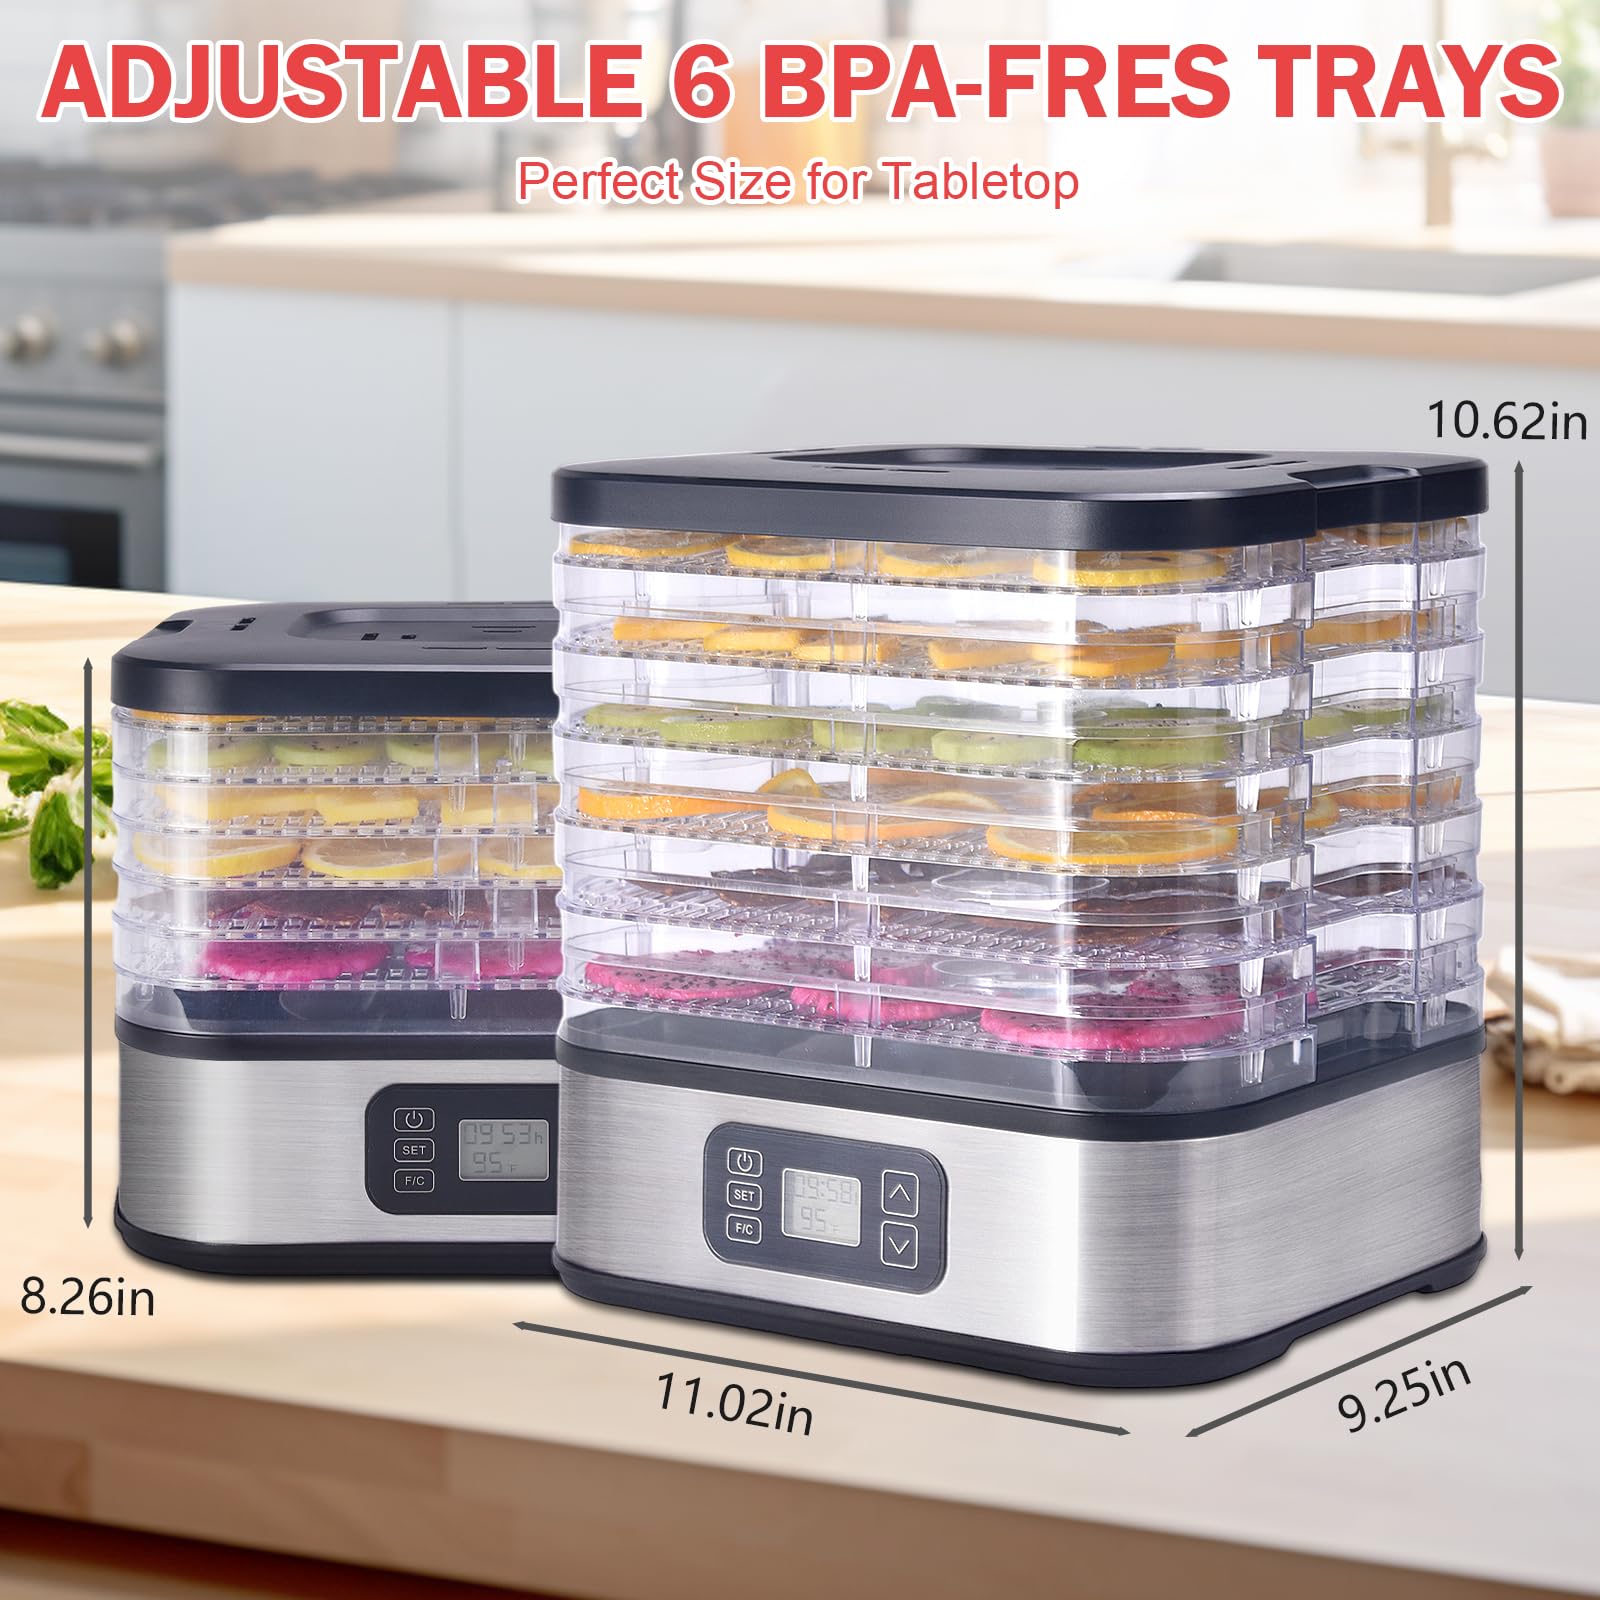 HOPERAN Food Dehydrator, 6 Trays Dehydrator with 72H Timer & 95-167℉ Temperature Control & LED Display, Dehydrators for Food and Jerky, Fruits, Herb, Veggies, Pet Treat, BPA-Free, Recipe Book Included